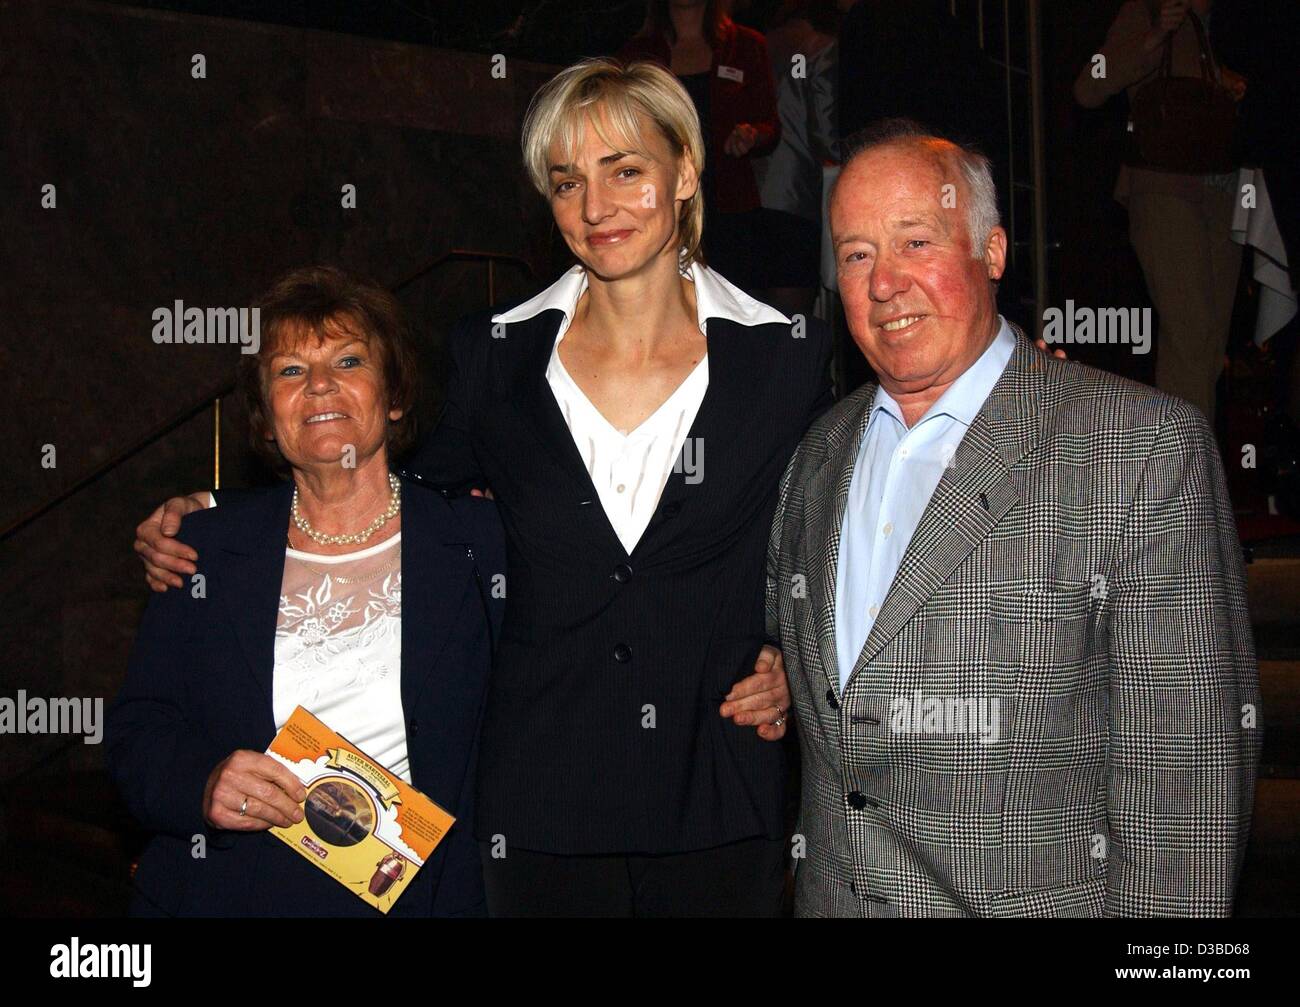 (dpa) - German athlete Heike Drechsler, world class long jumper, stands between her mother and father at the so-called 'Zuckerhut Party' (sugar loaf party) by the confectionery producer Lambertz in Cologne, Germany, 27 January 2003. Stock Photo